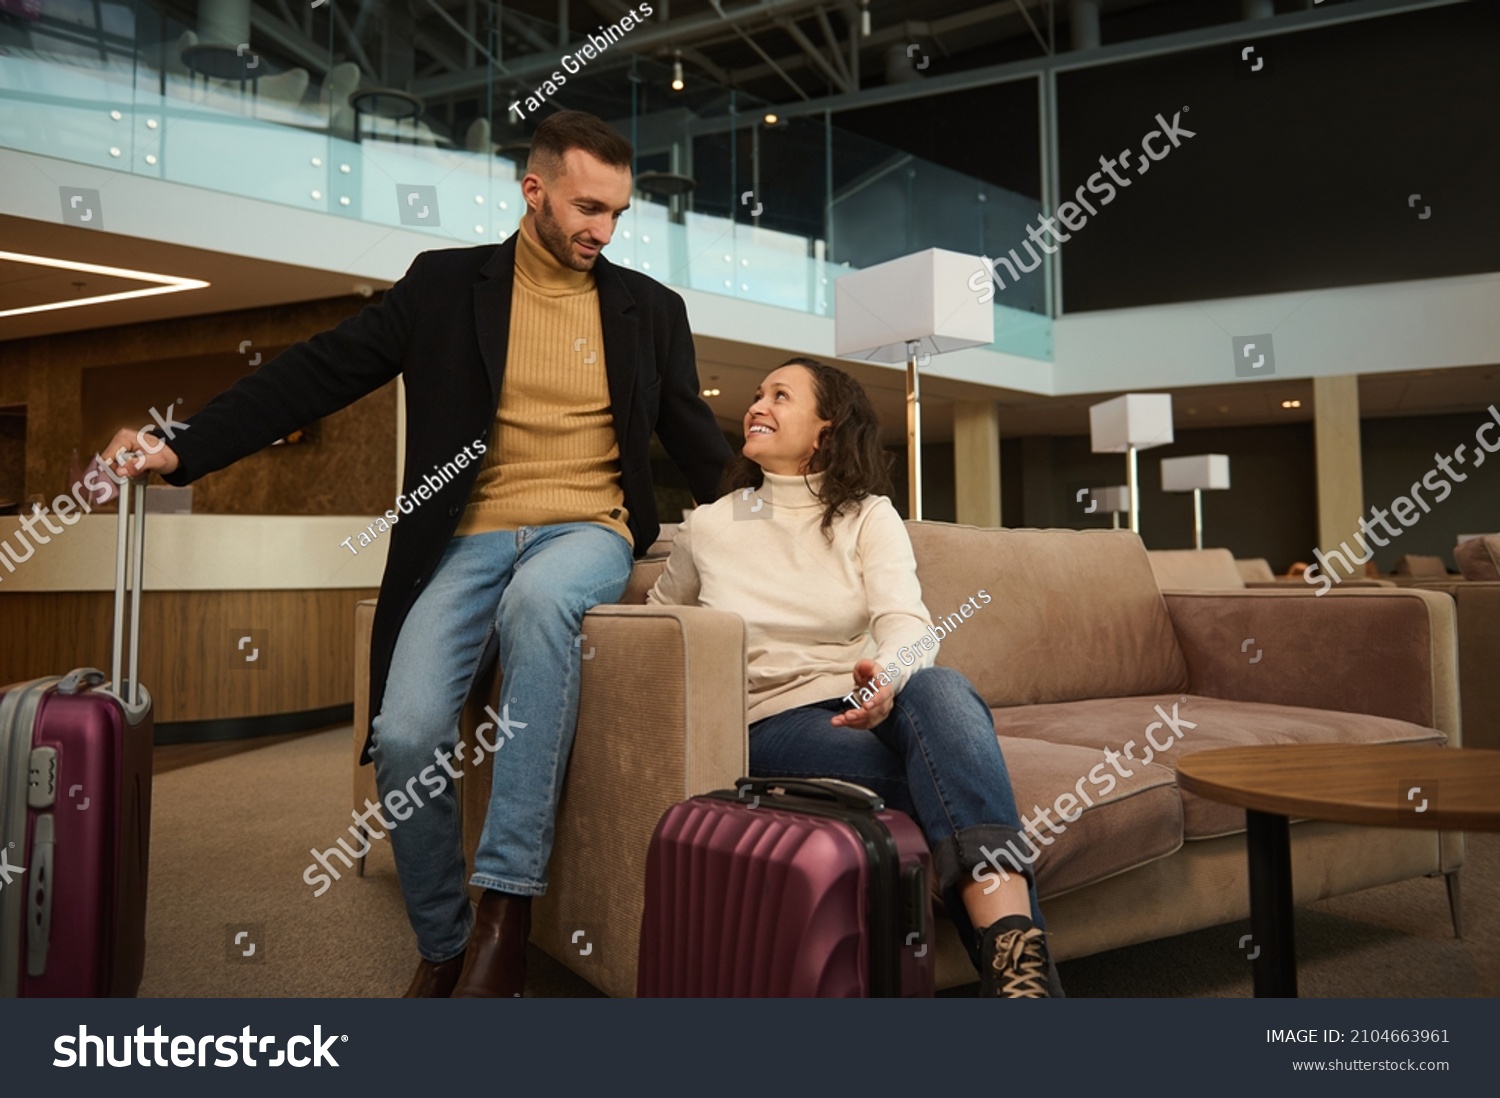 Woman and man in casual clothes with suitcases sitting on armchair in the international airport terminal lounge, looking at each other, discussing forthcoming flight, waiting for airplane departure #2104663961